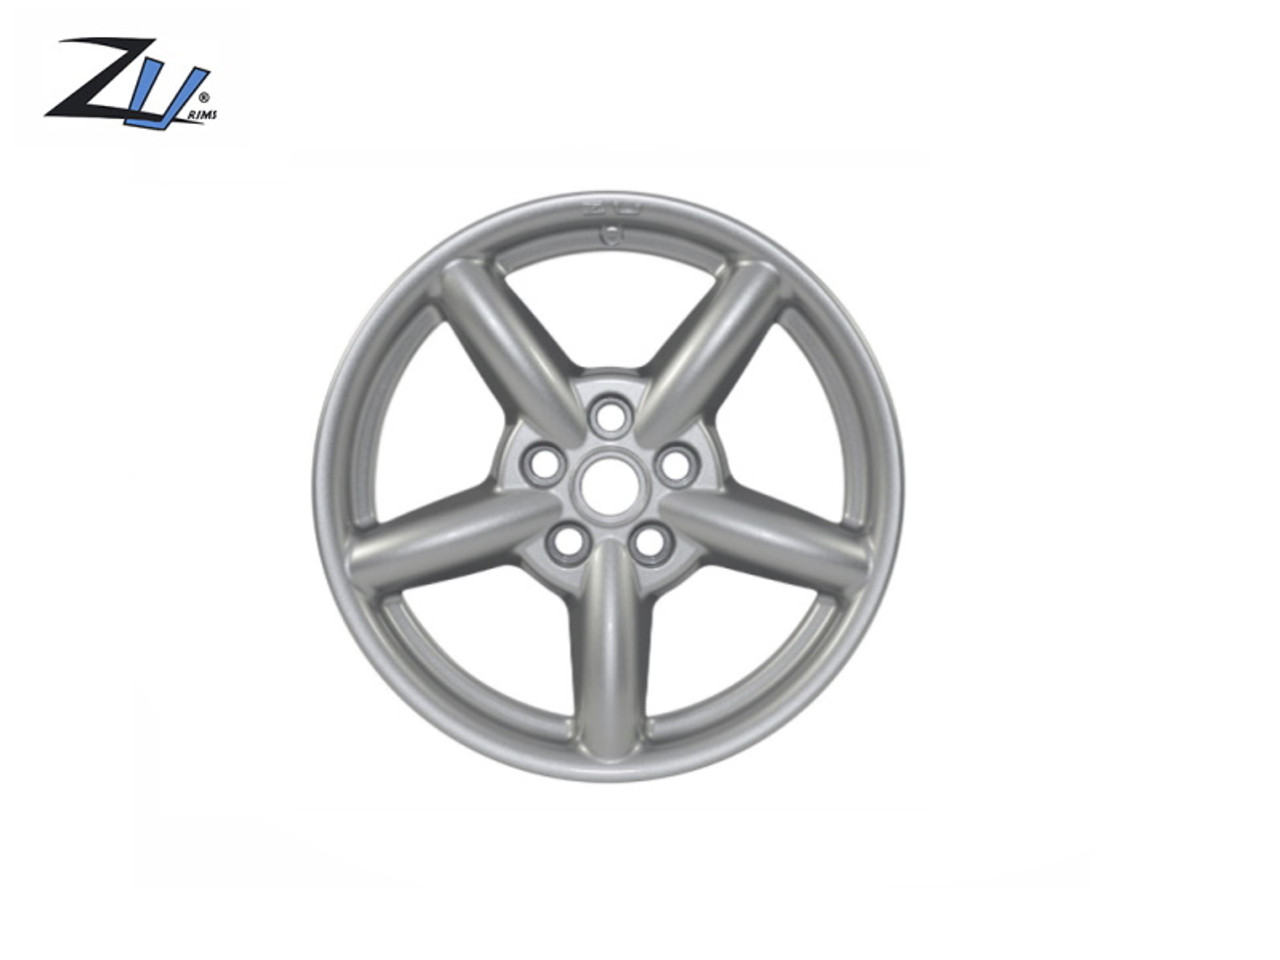 Zu Alloy Wheel Finished In Gloss Silver 16 x 8 With 5 x 120 Stud Pattern - DA2431